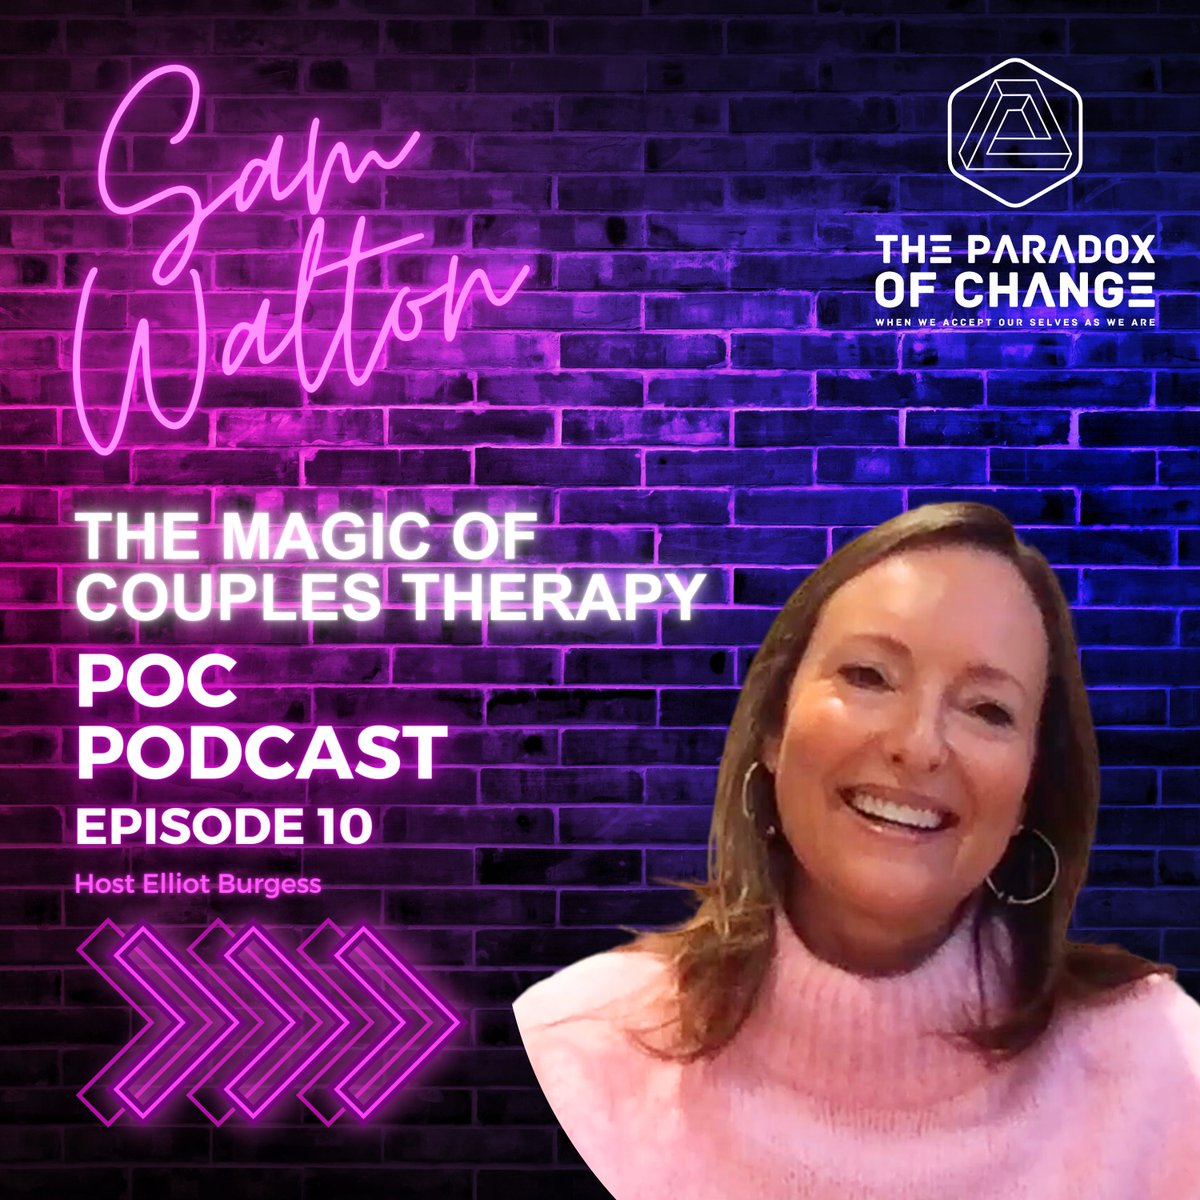 Follow the link to listen to the episode in full: youtube.com/watch?v=PX-n5u…

#couplescounselling #couplestherapy #psychosexual #psychosexualtherapy #couplegoals #sexandrelationships #relationshipgoals #growth #authenticity #intimacy #marriagegoals #emotionalsupport #sexandintimacy